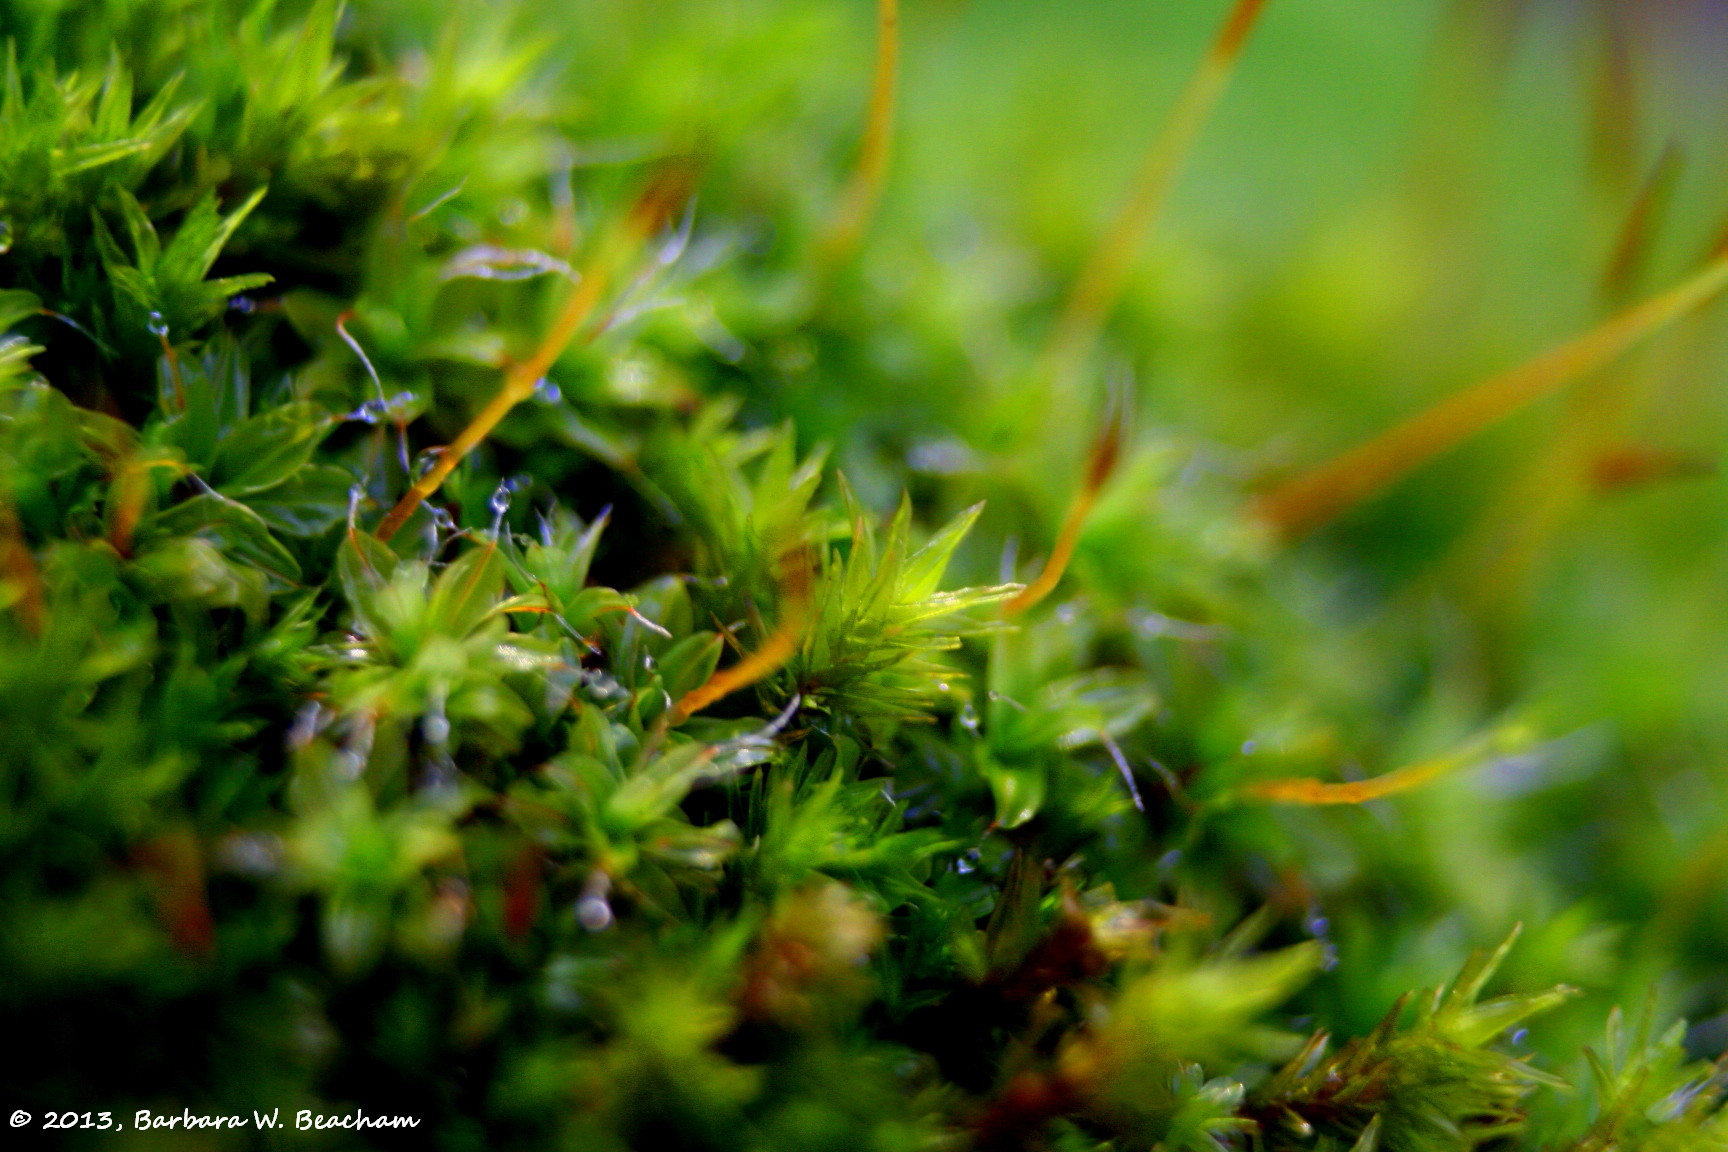 Moss up close | Life in the Foothills